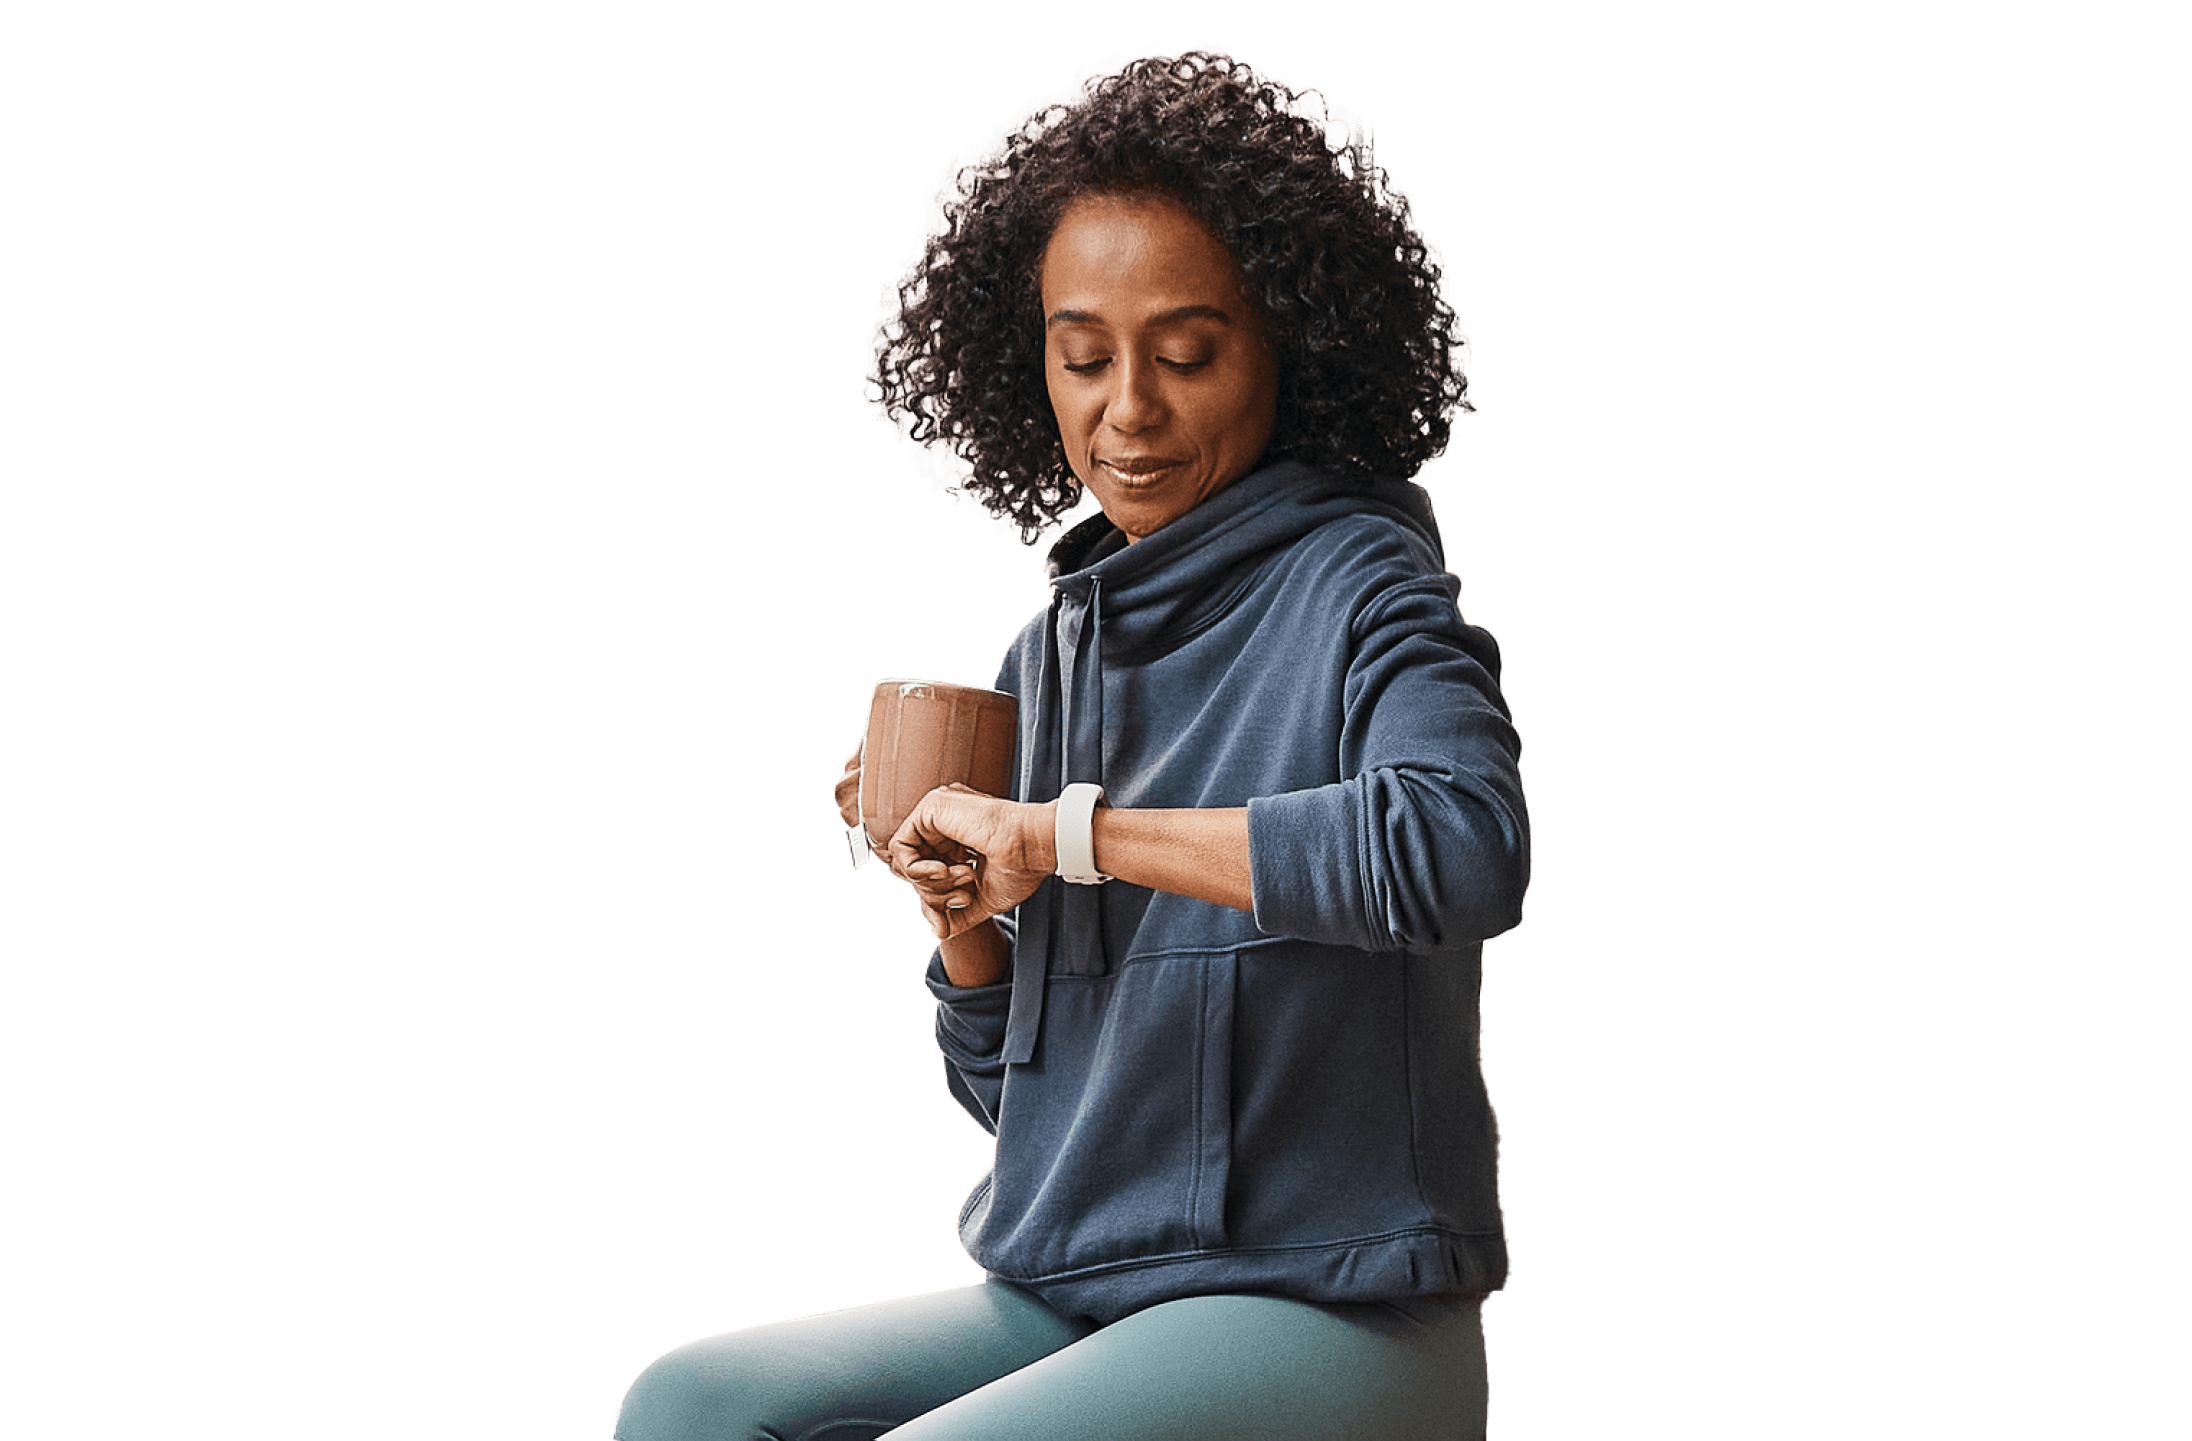 Woman with a mug checking her watch